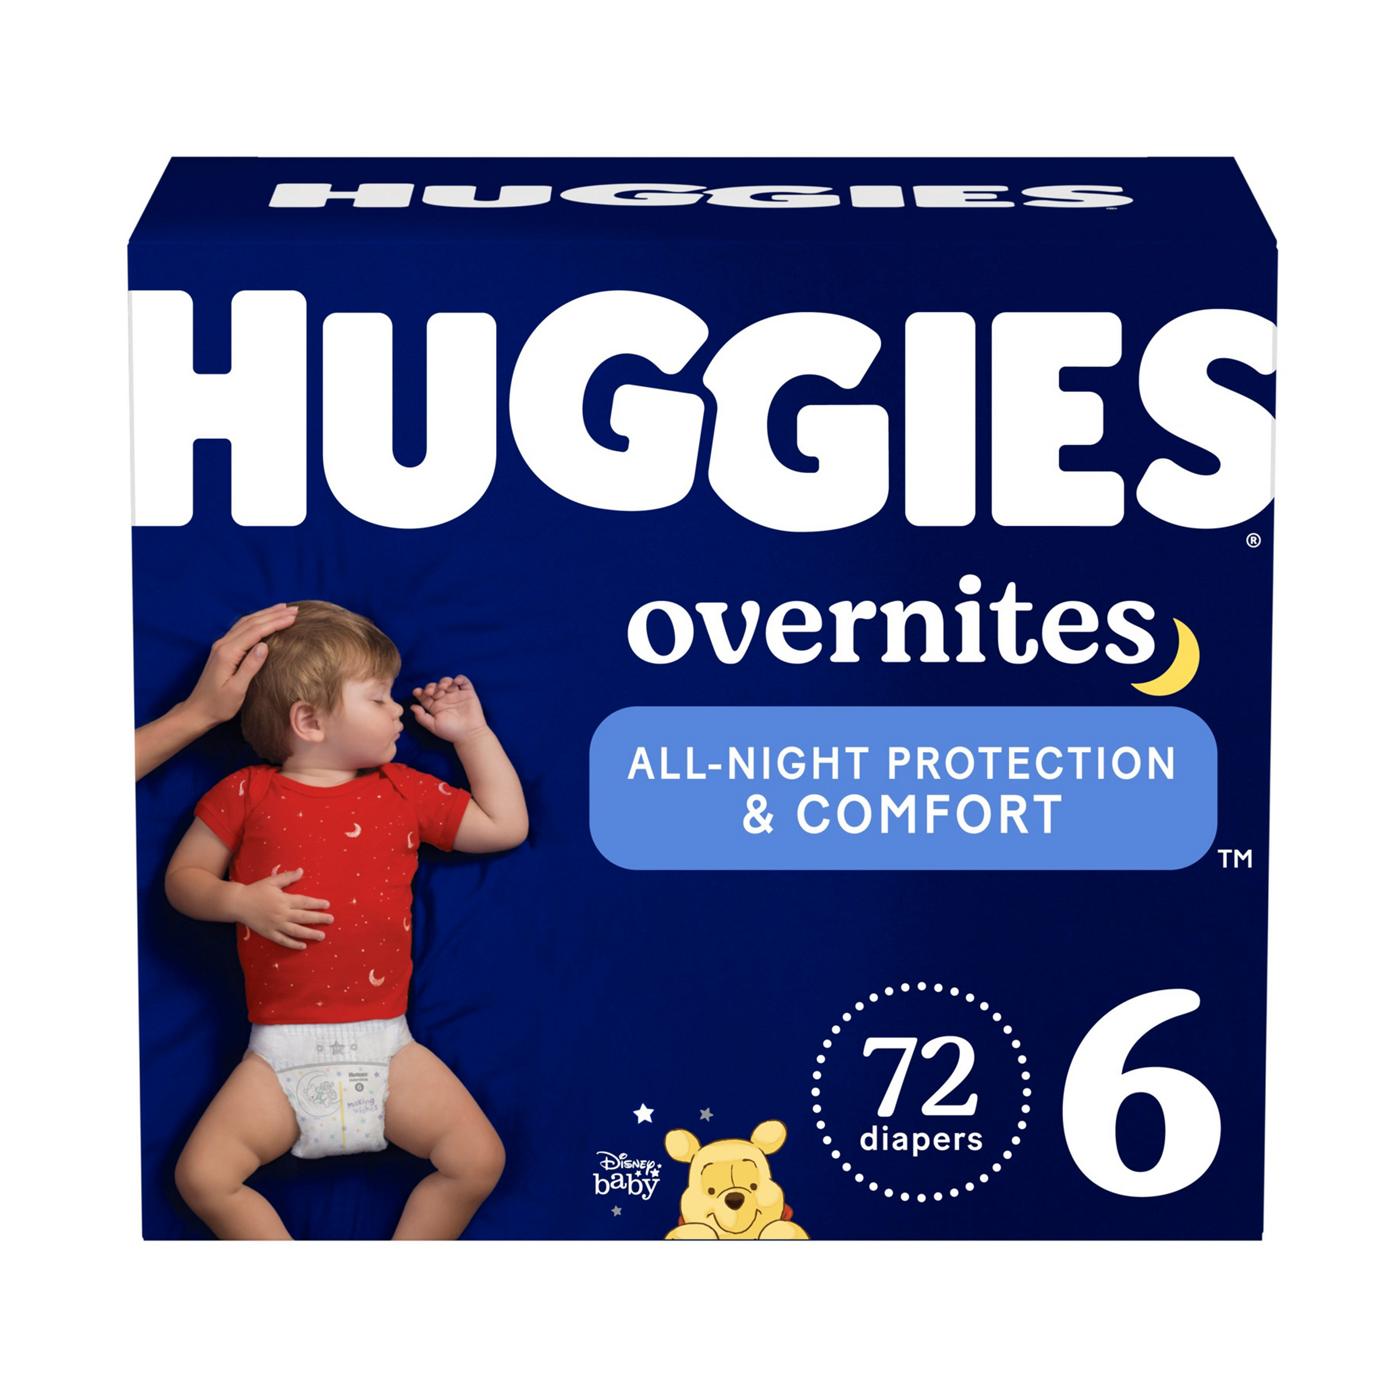 Huggies Overnites Nighttime Baby Diapers - Size 6; image 1 of 7